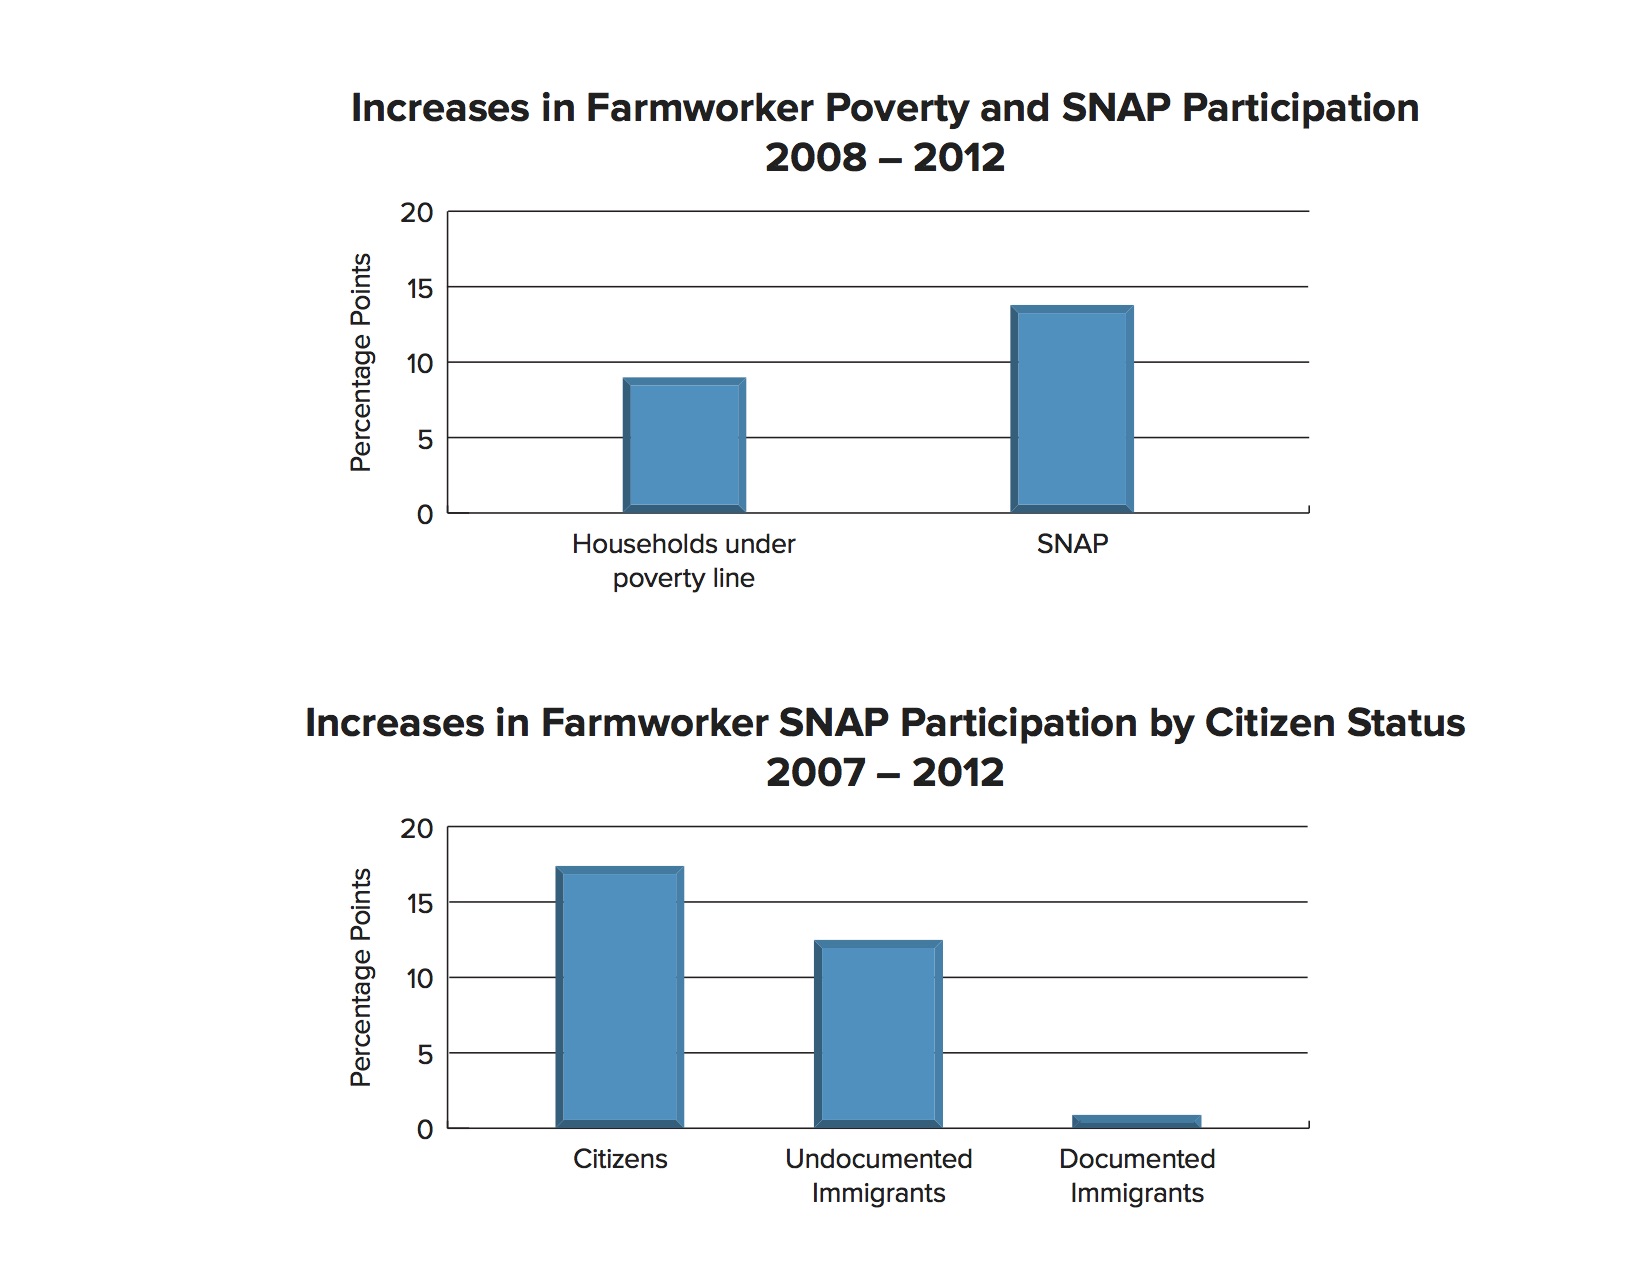 Increase in SNAP farmworker household participation